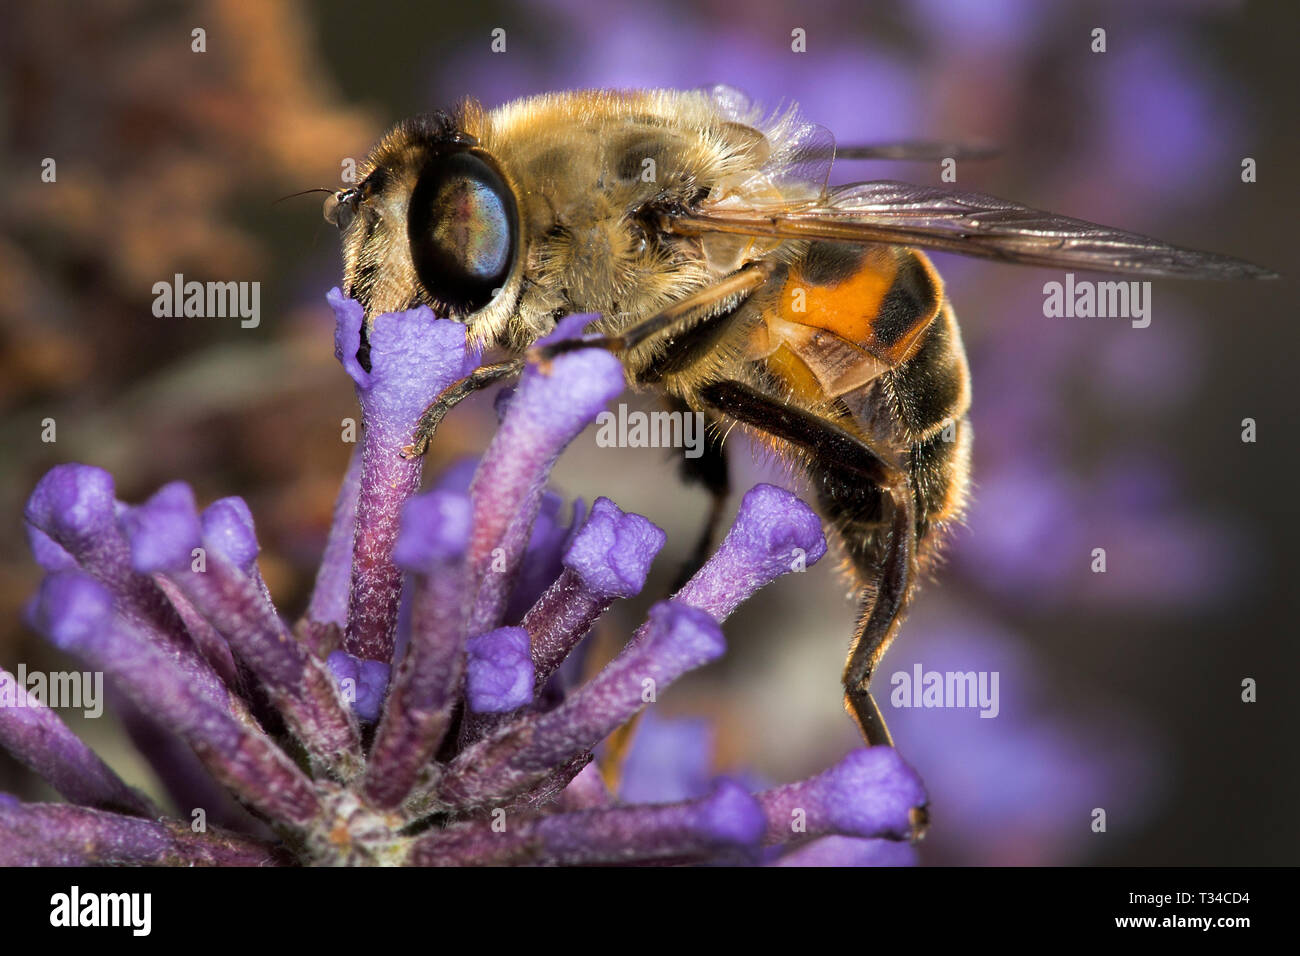 Honey bee close up on budlea flower. Stock Photo